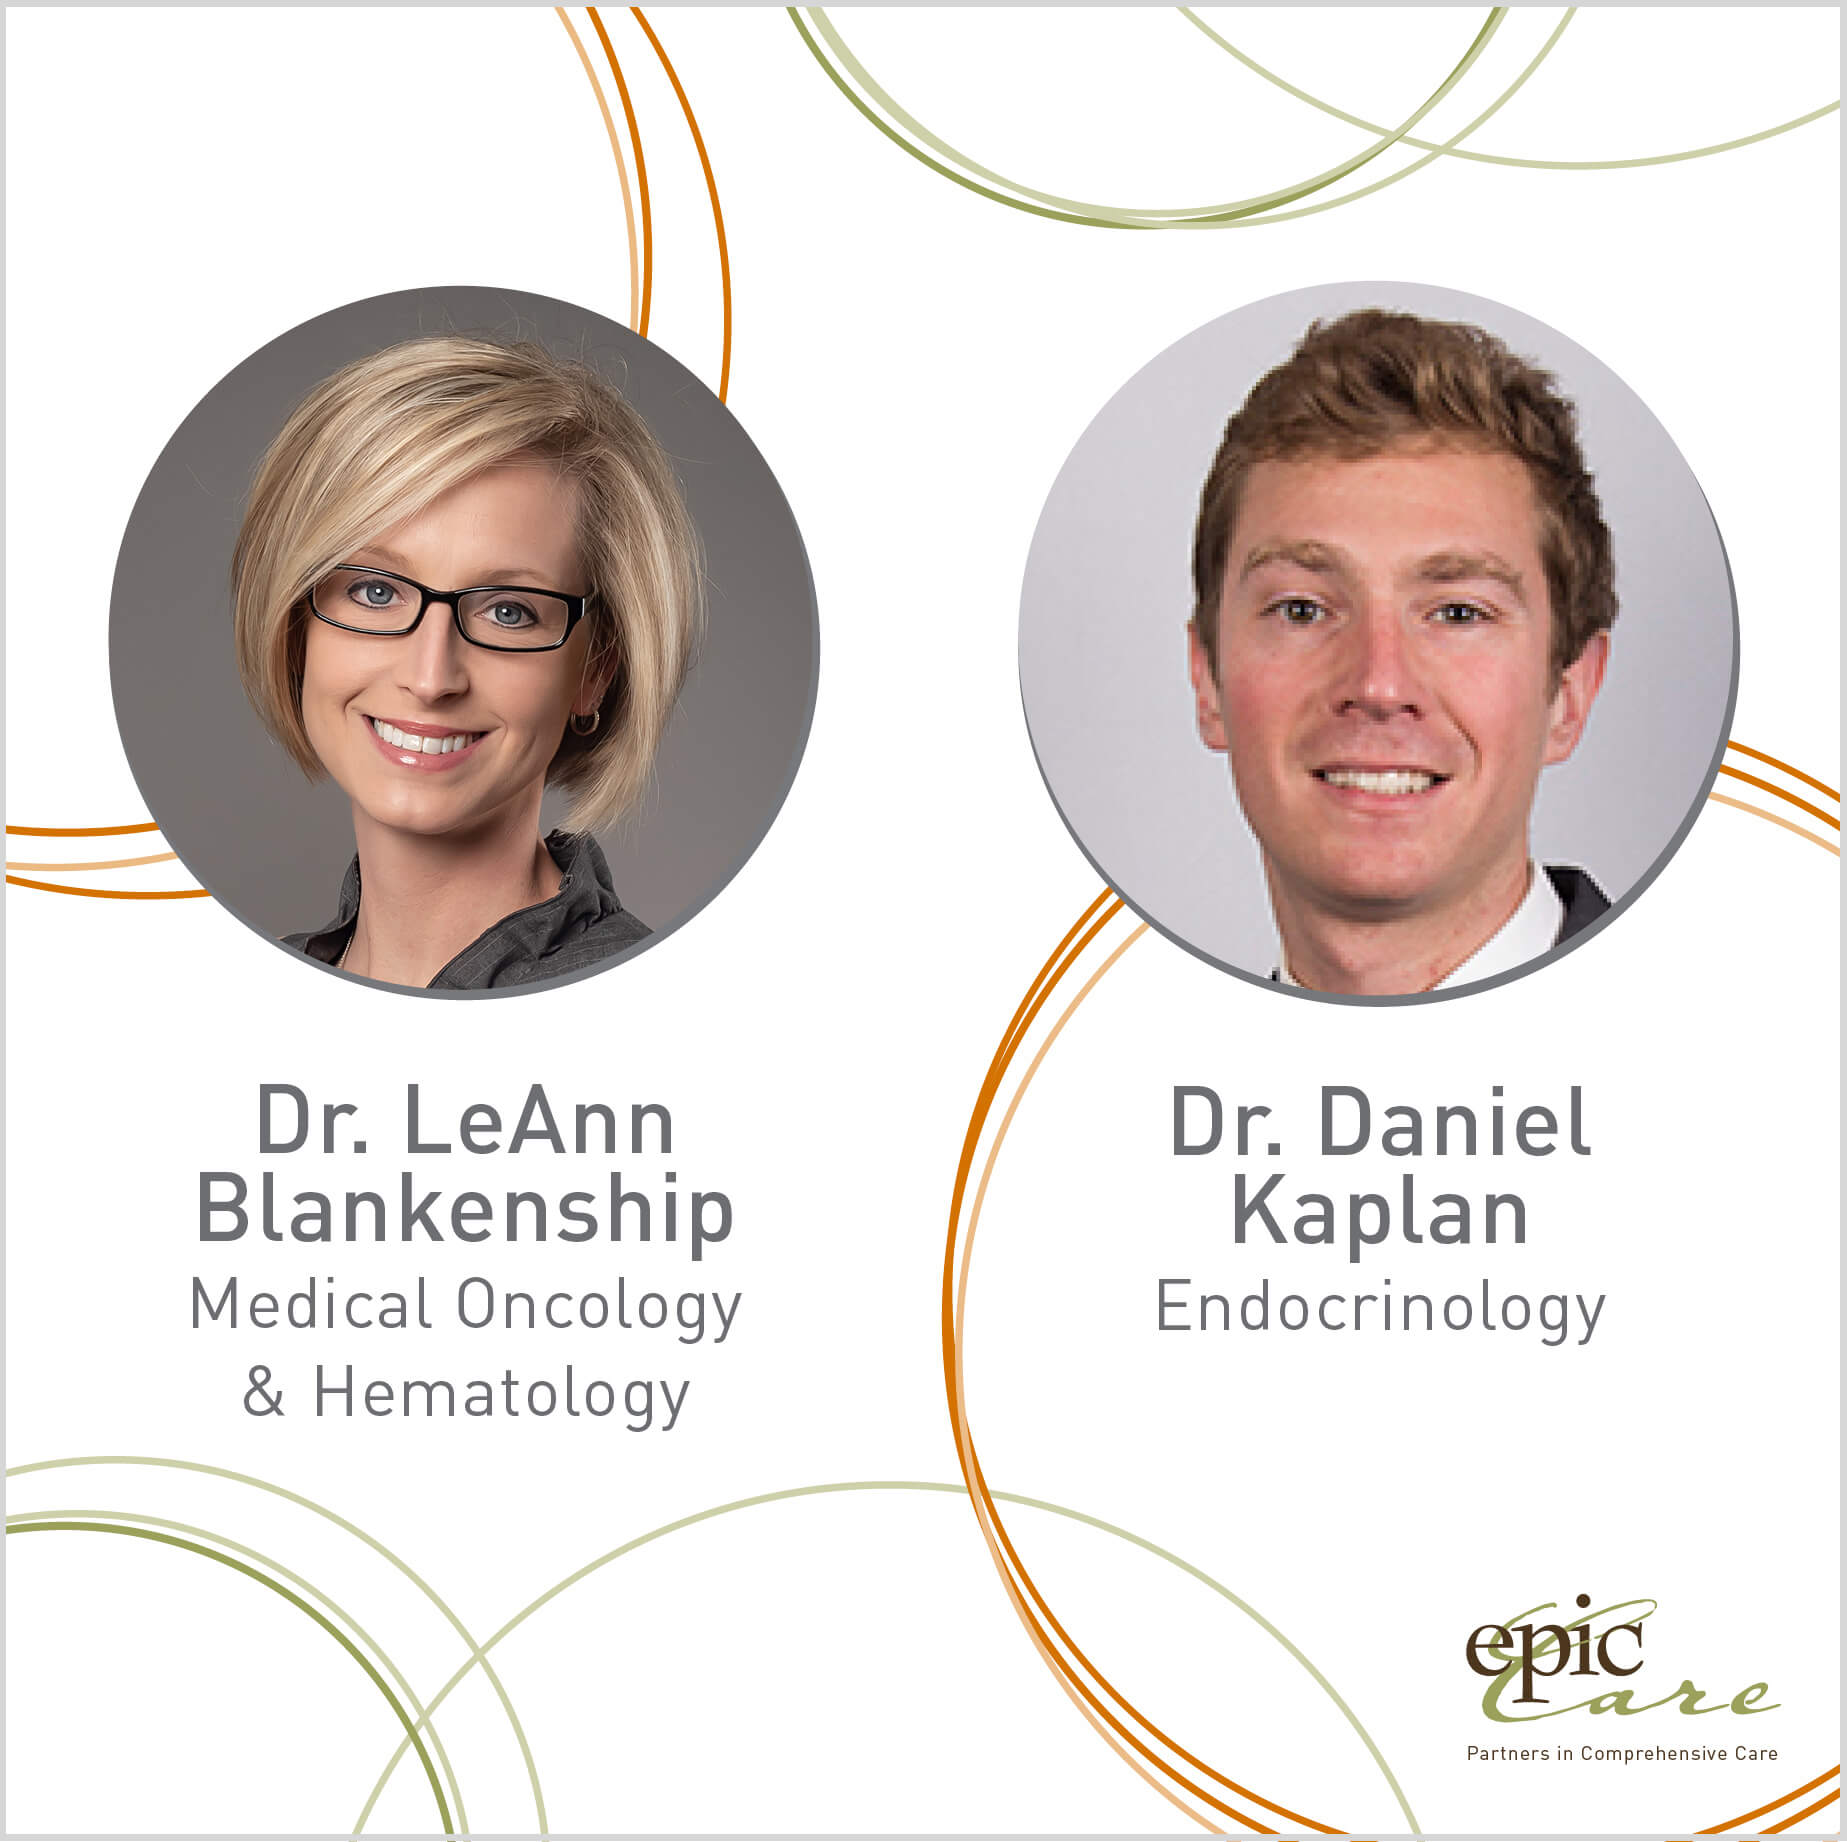 Welcome Drs. LeAnn Blankenship & Daniel Kaplan To The Epic Care Team!